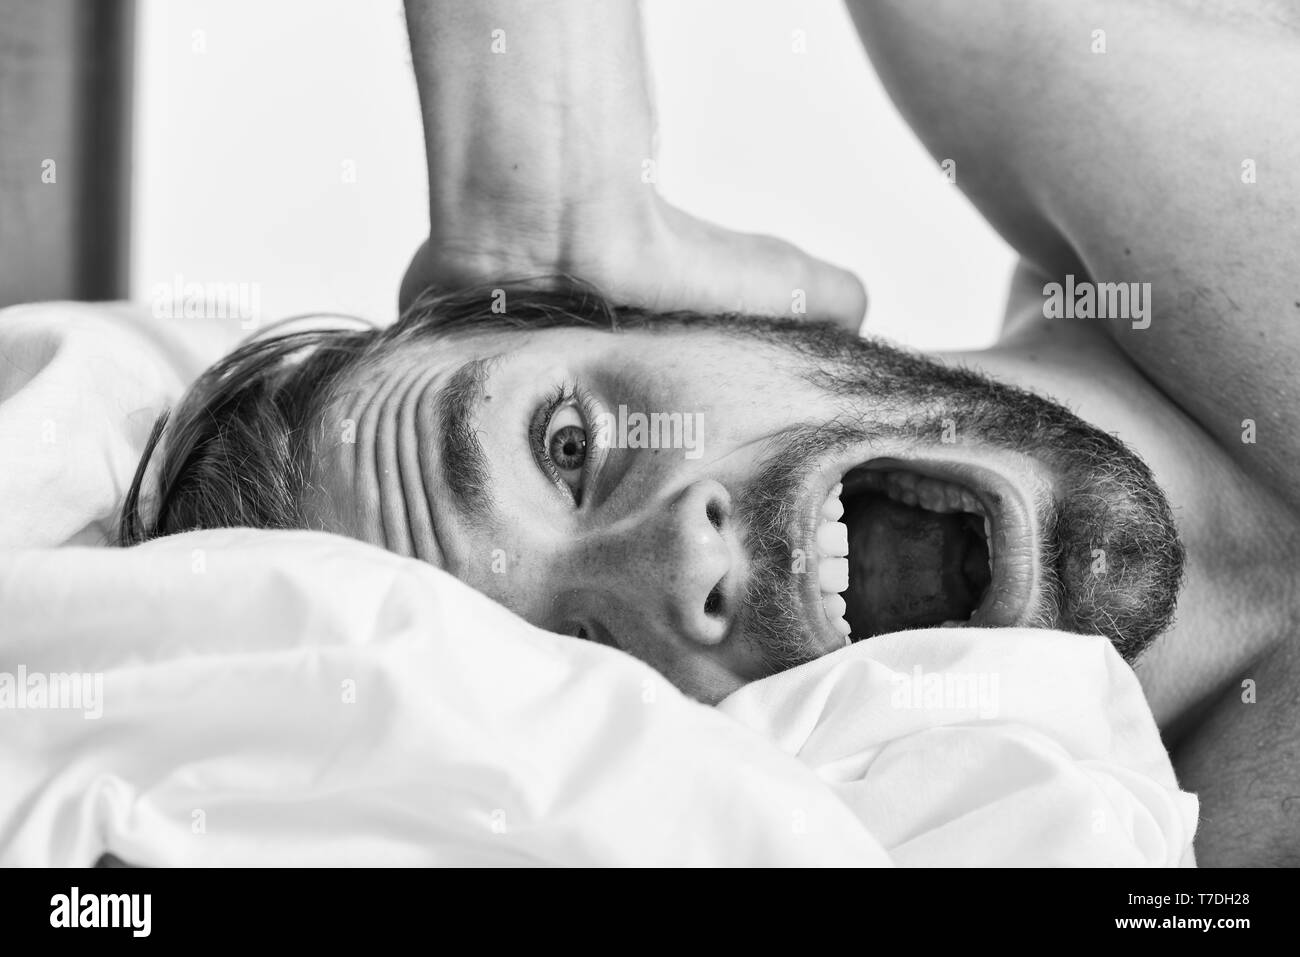 How to get up in morning feeling fresh. Late morning overslept. Morning routine tips to feel good all day. Man handsome guy lay in bed in morning. Tips on how to wake up feeling fresh and energetic. Stock Photo